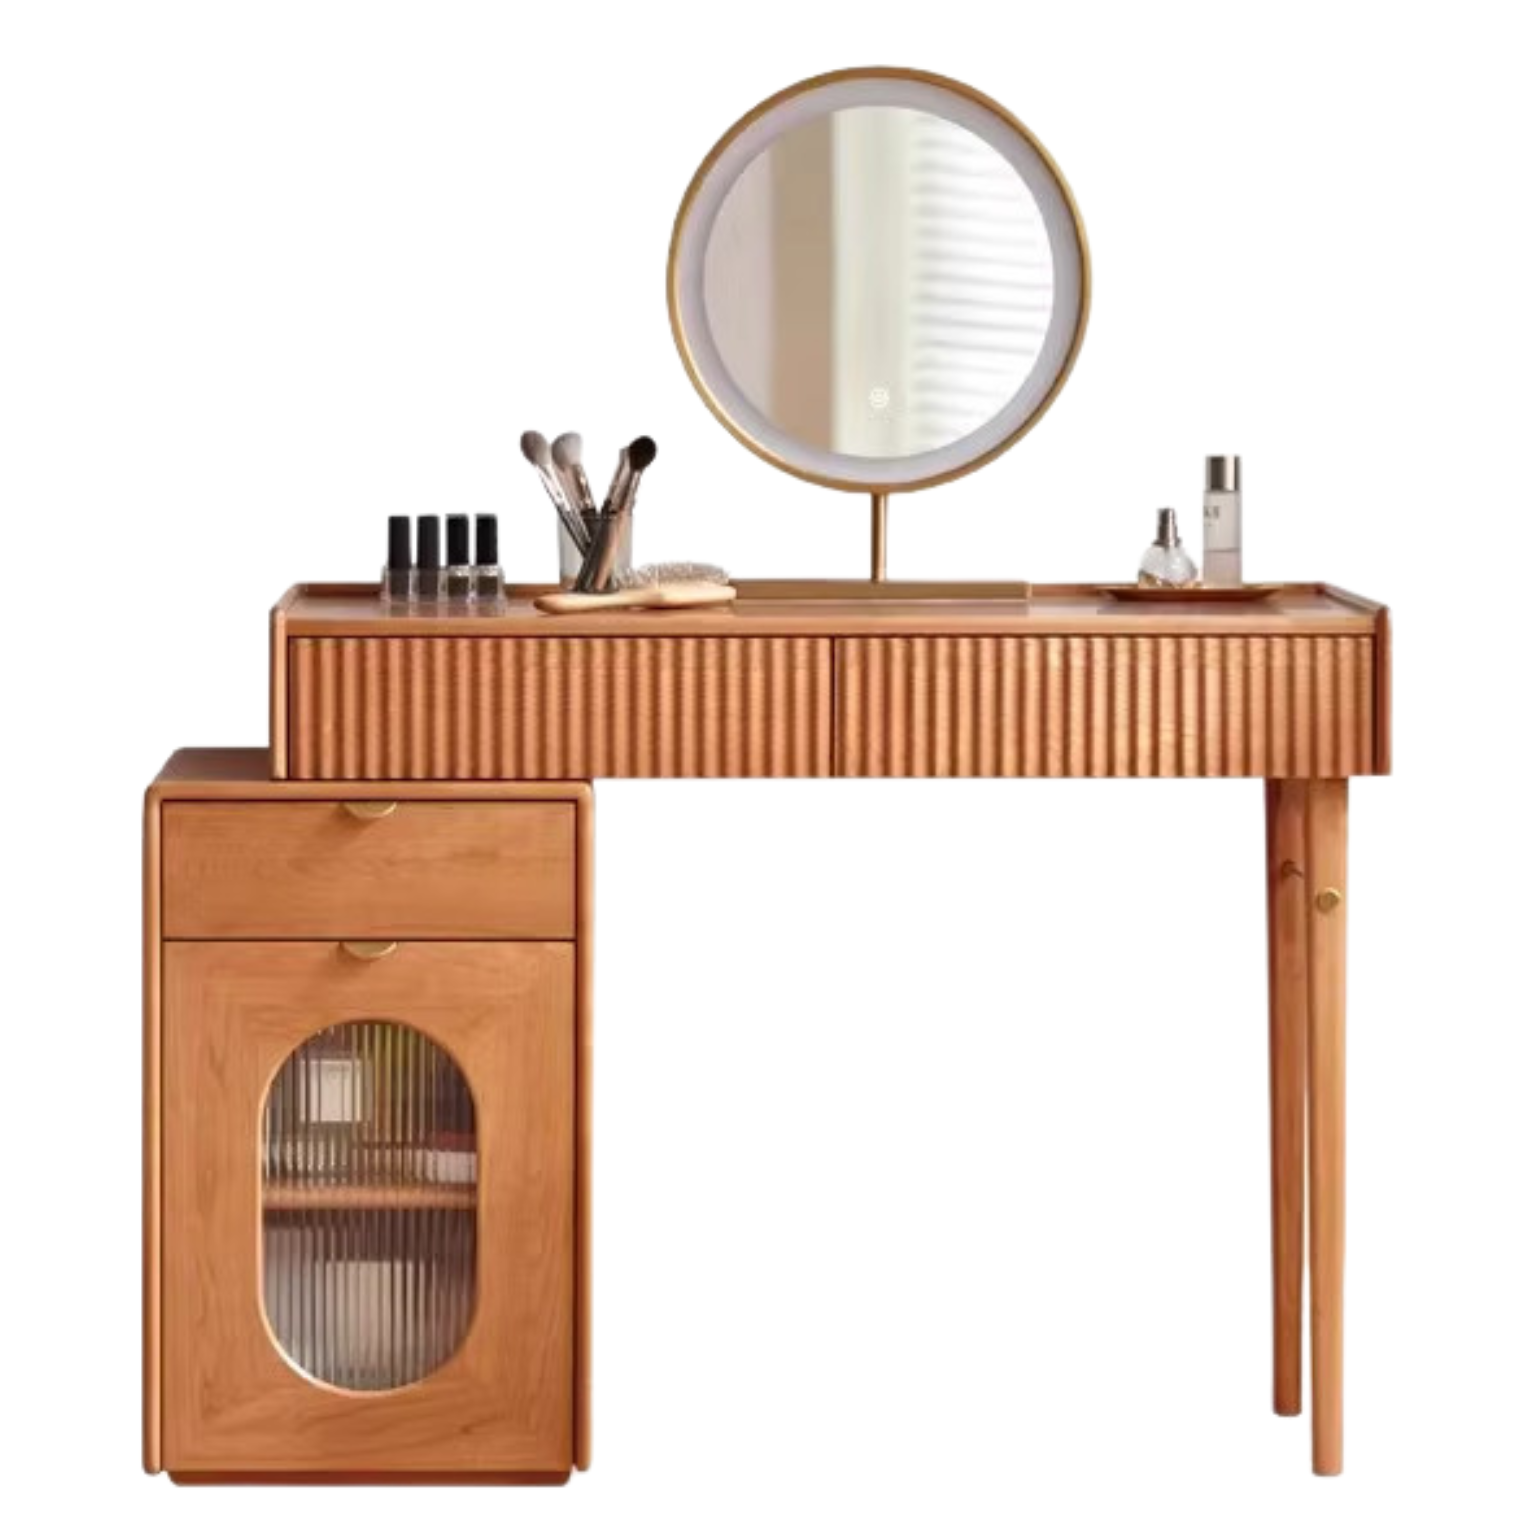 Cherry Wood Dressing Table, Storage Cabinet: